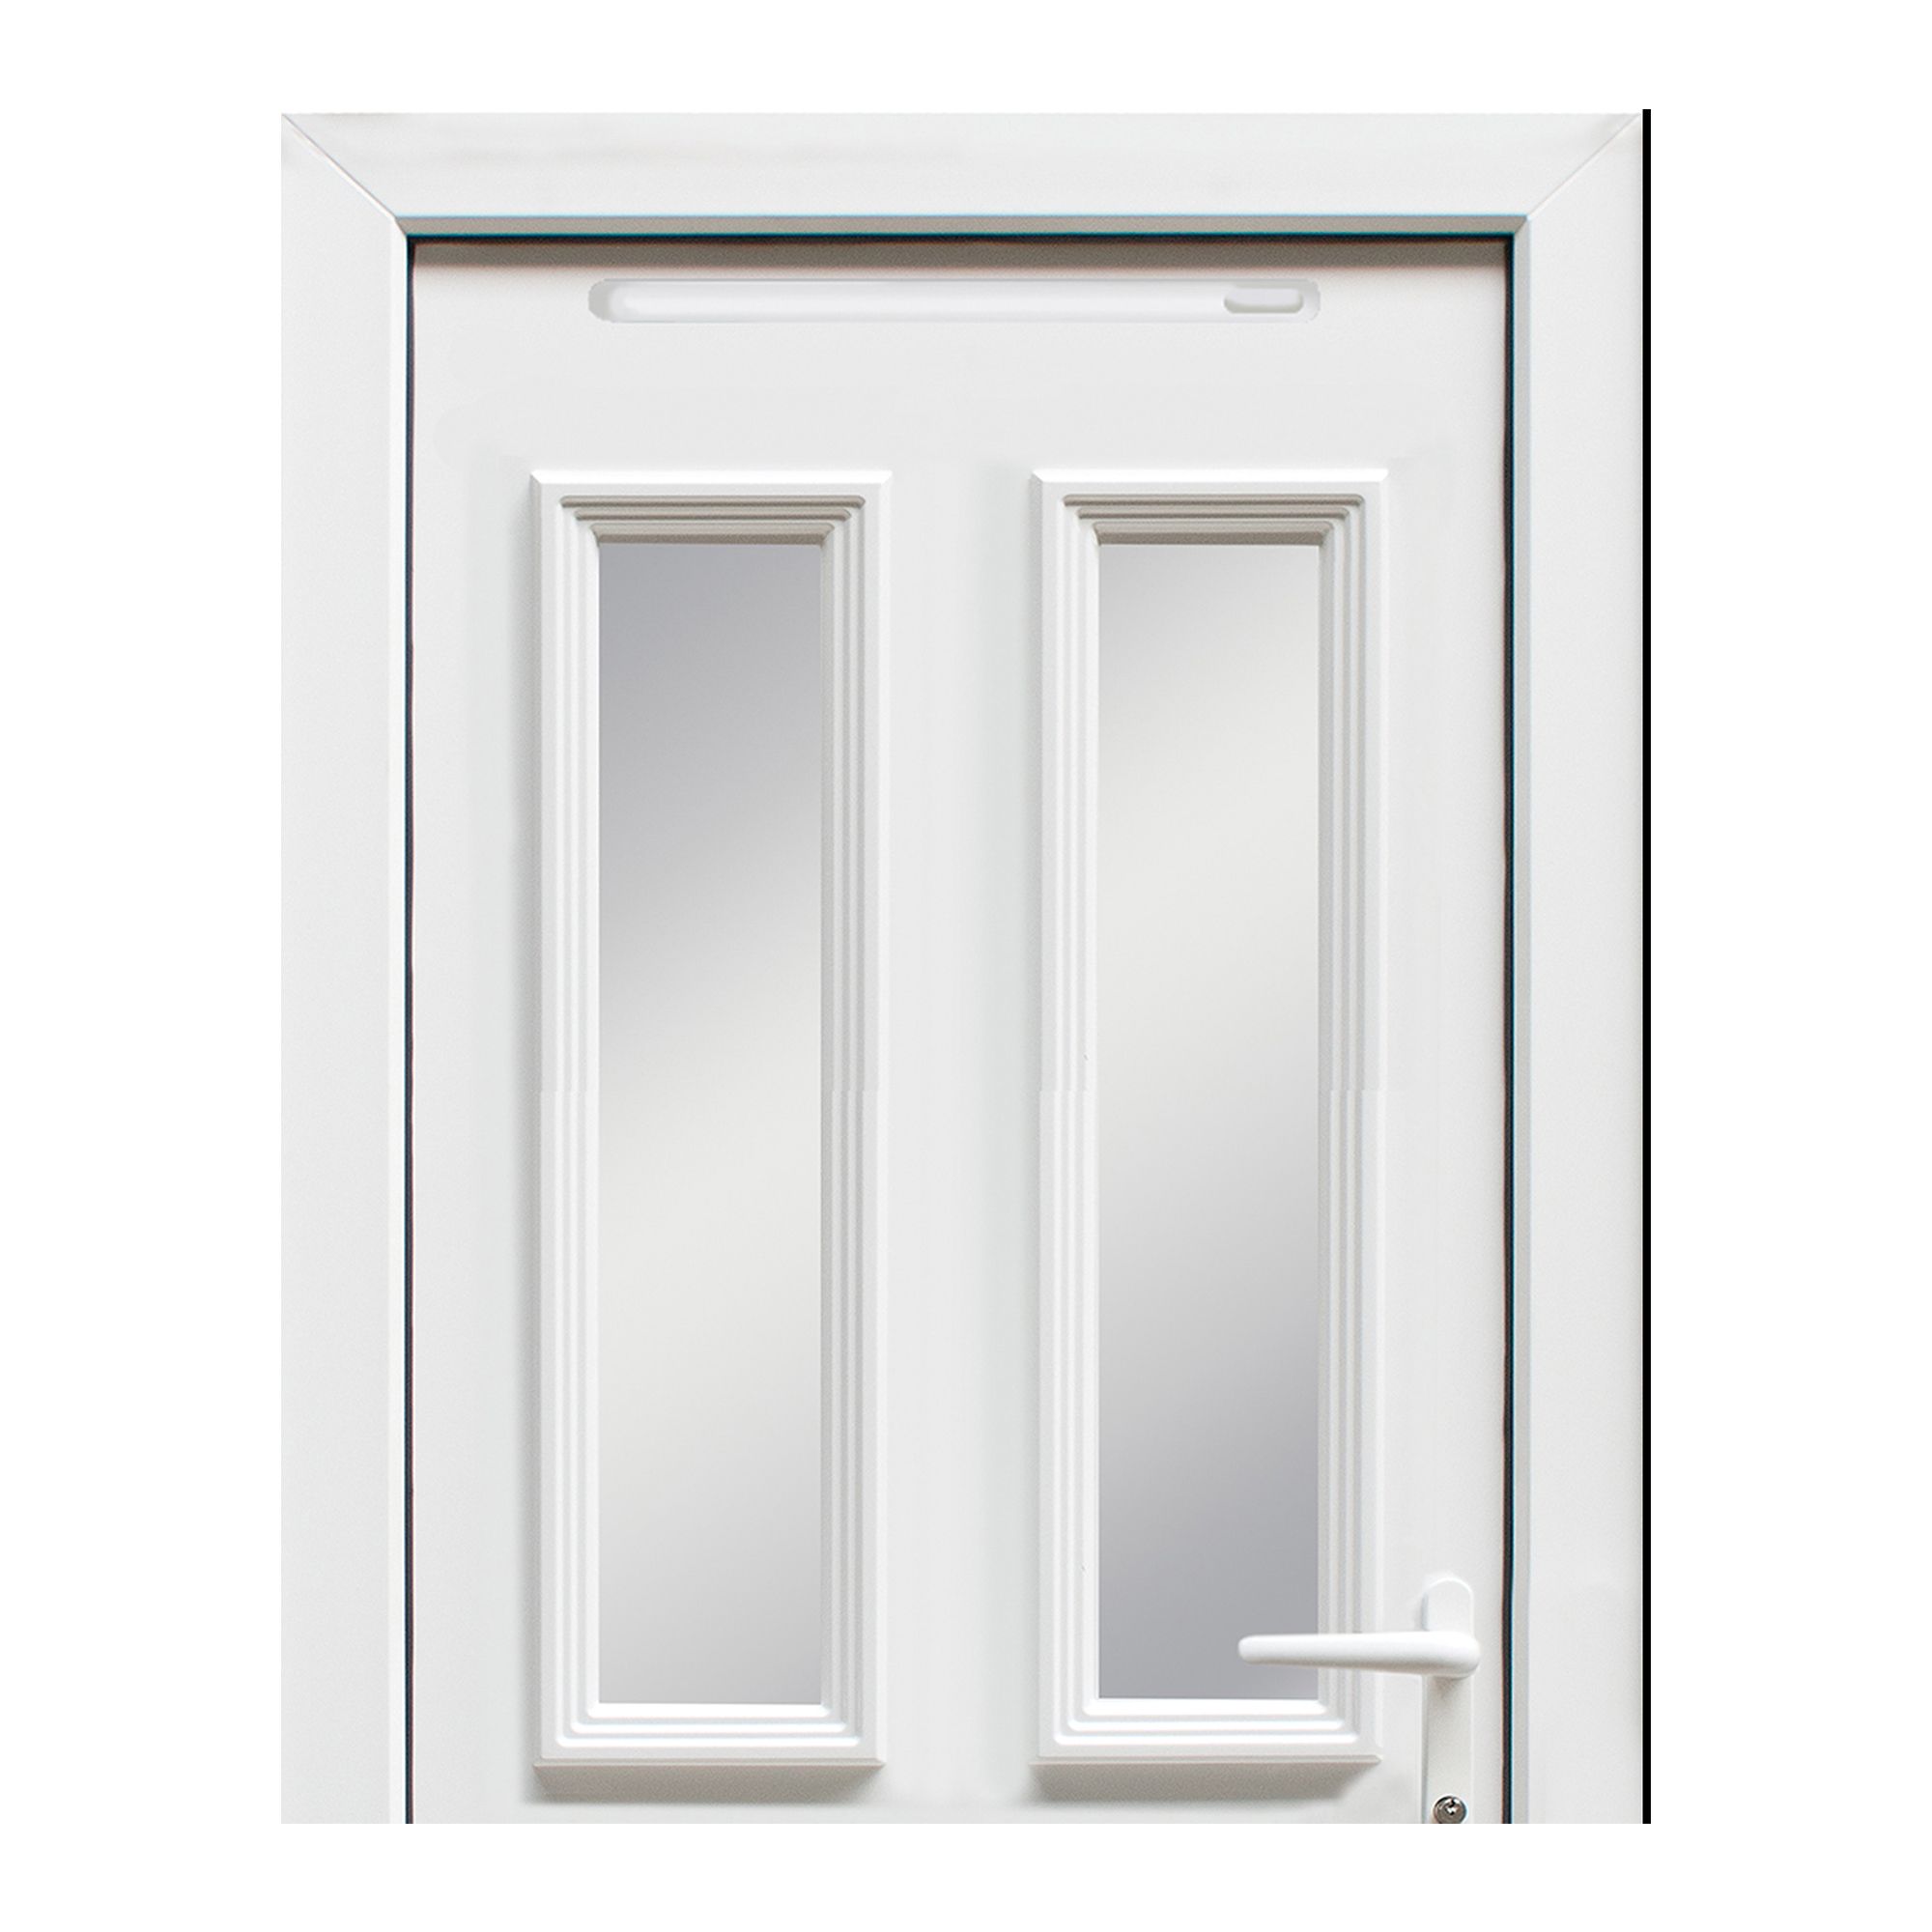 4 panel Diamond bevel Frosted Glazed White LH External Front Door set, (H)2055mm (W)840mm